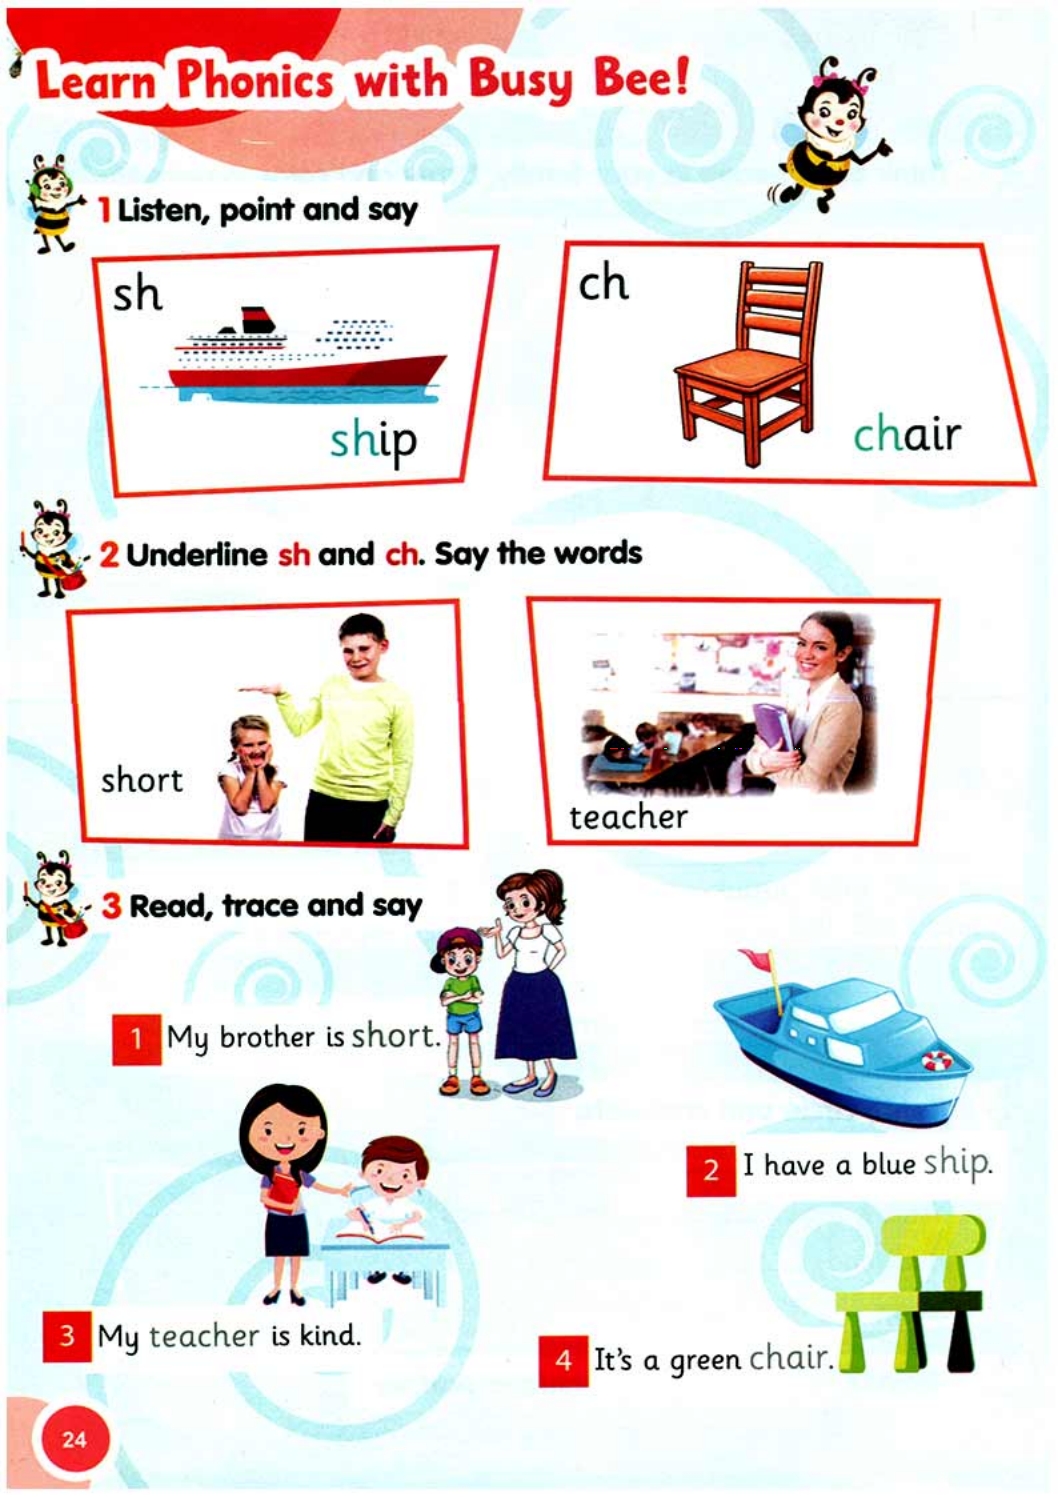 Learn phonics with Busy Bee